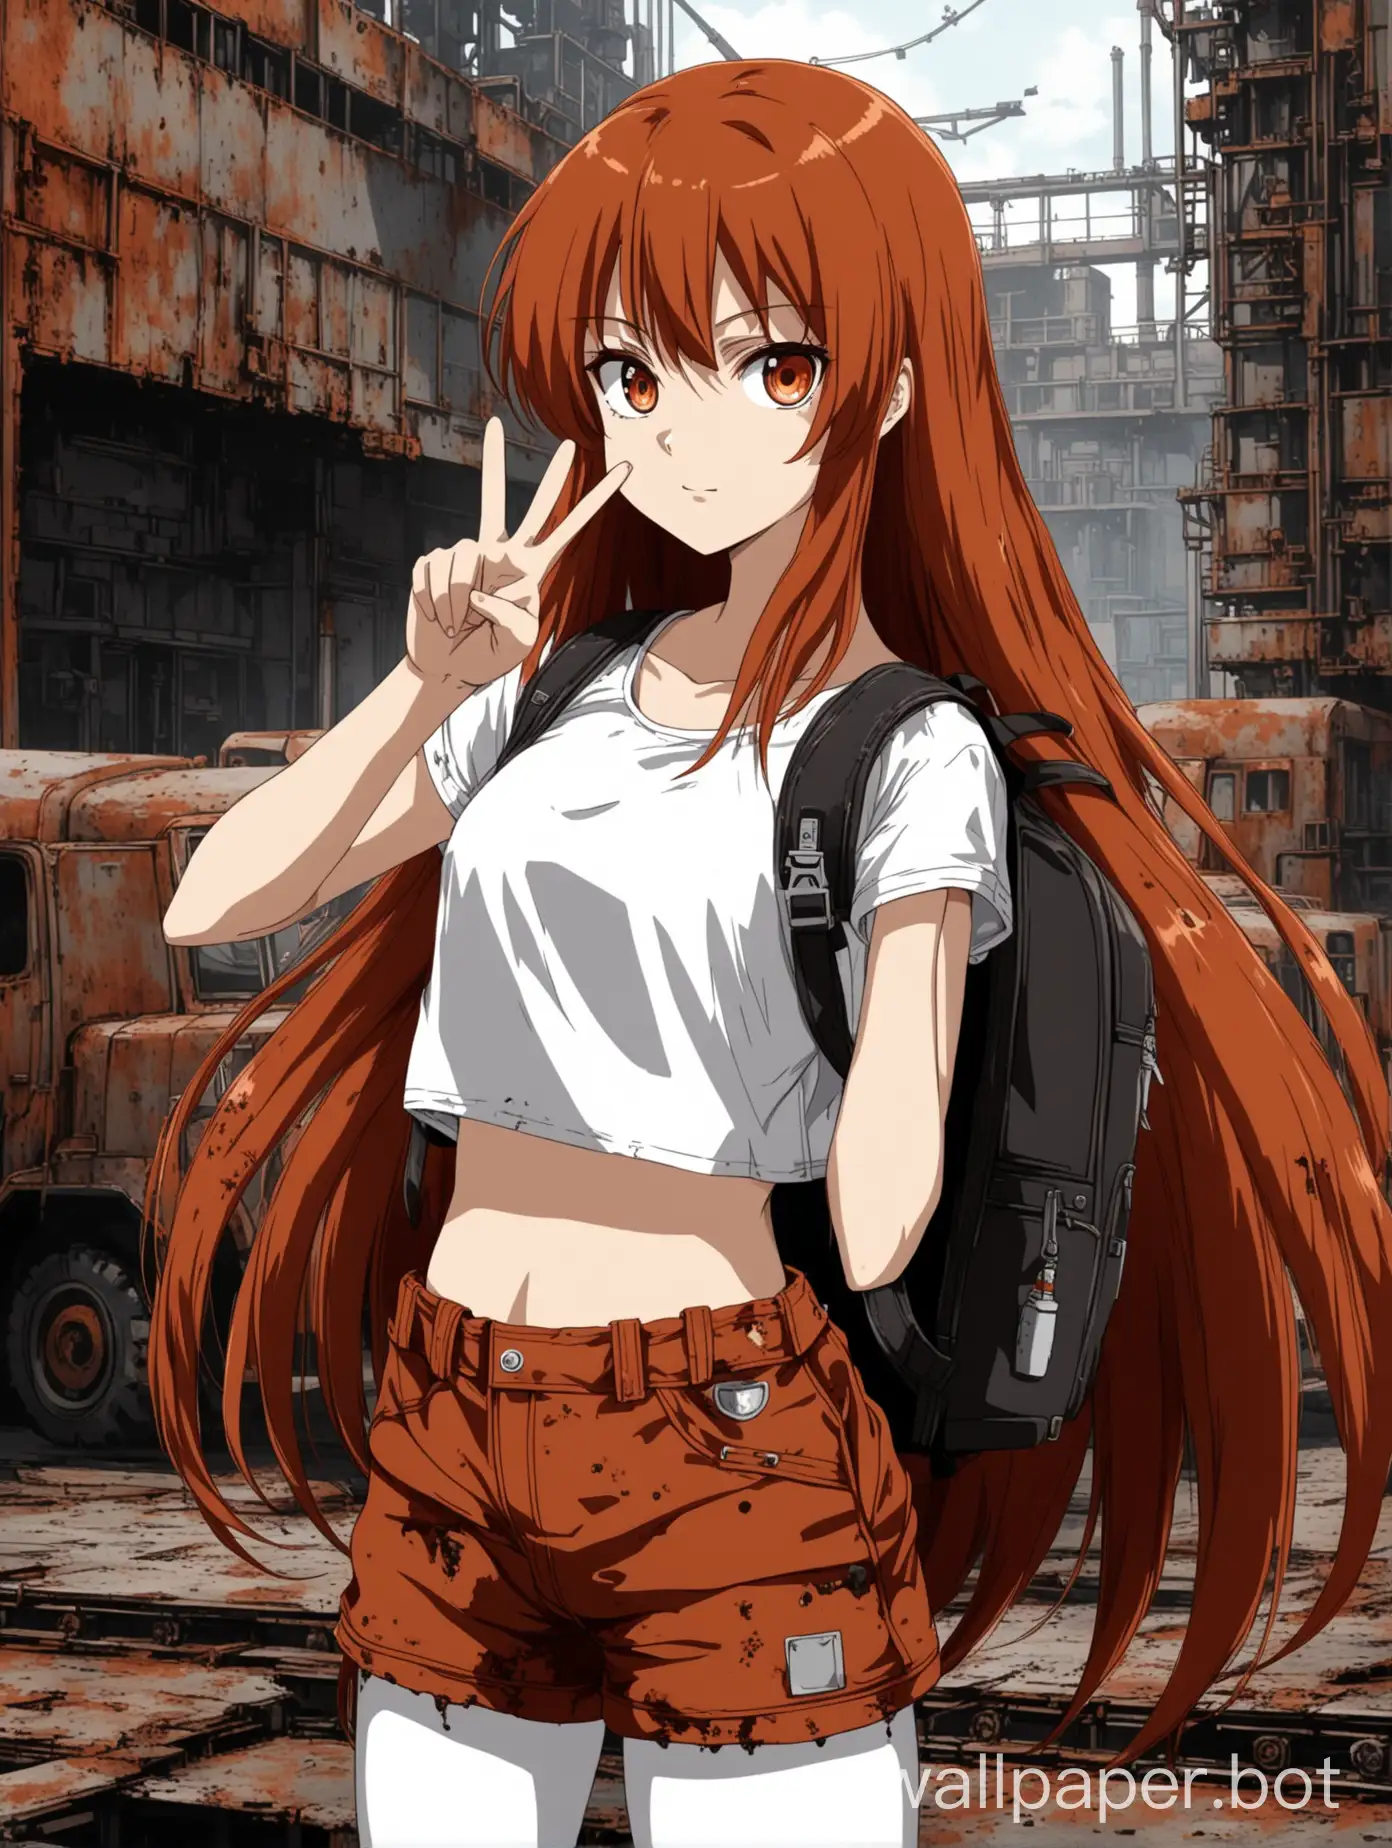 an anime girl in a white tight crop top, with rust colored very long hair, wearing a backpack, doing the V sign in front of her eye and with rusty industrialistic shorts